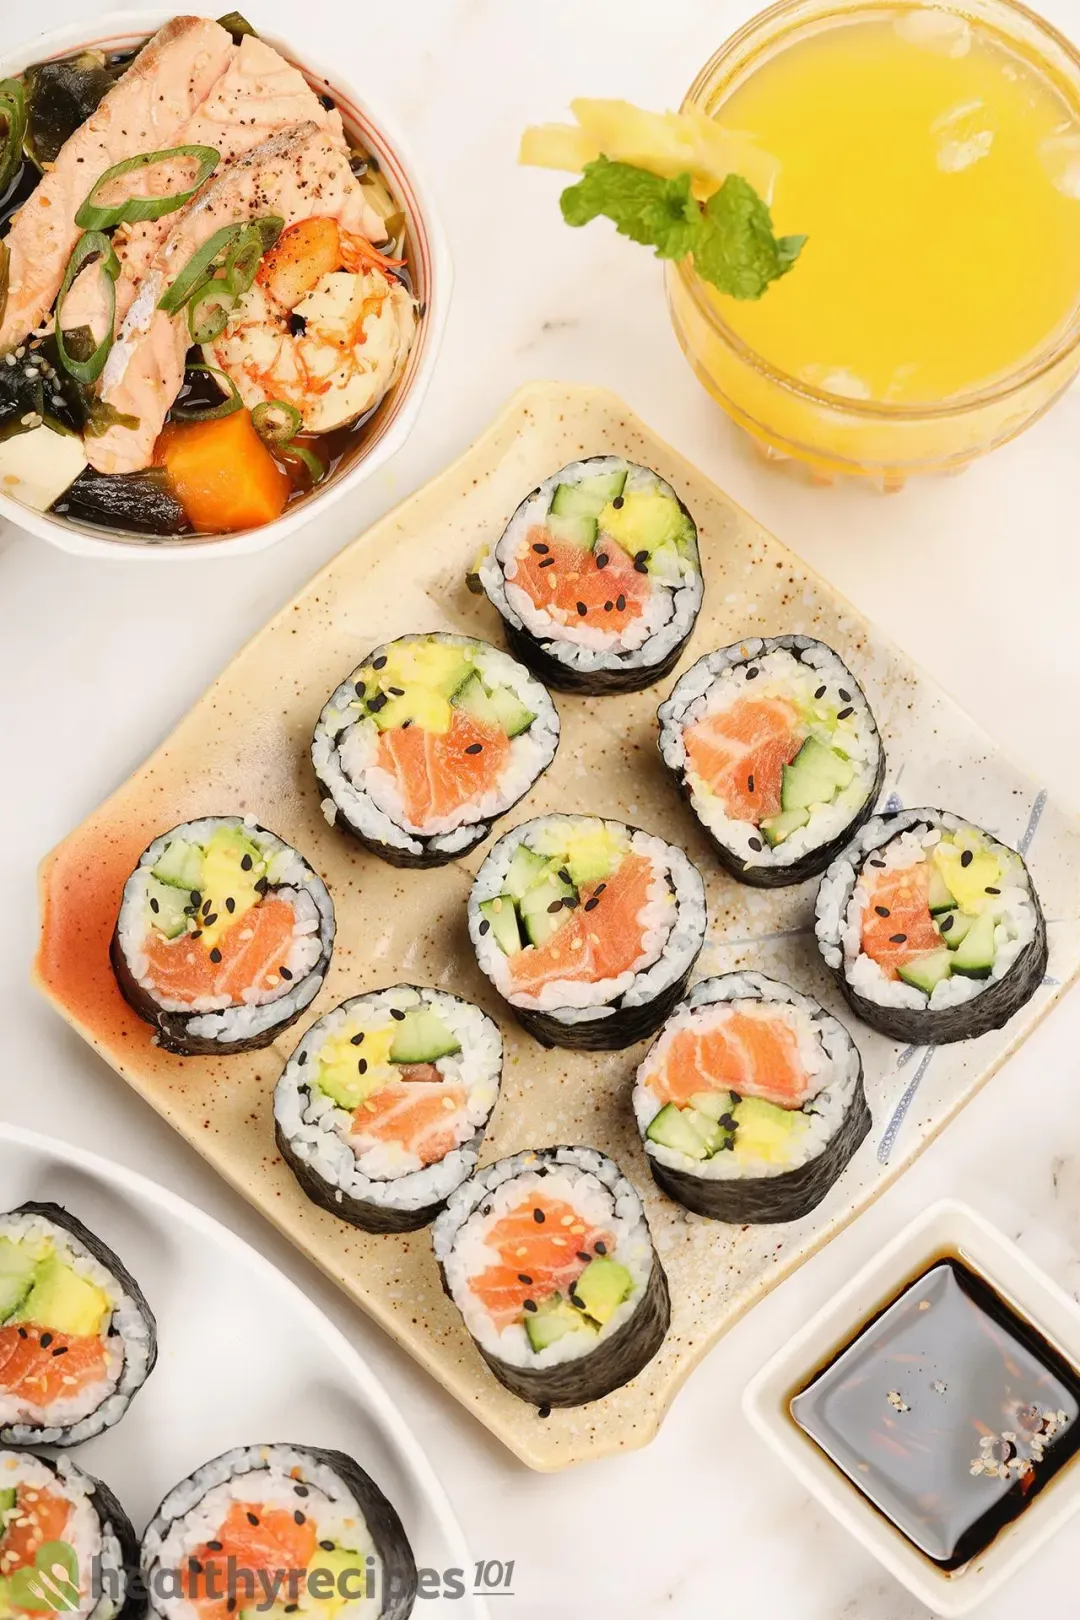 What to Serve With Your Sushi Roll